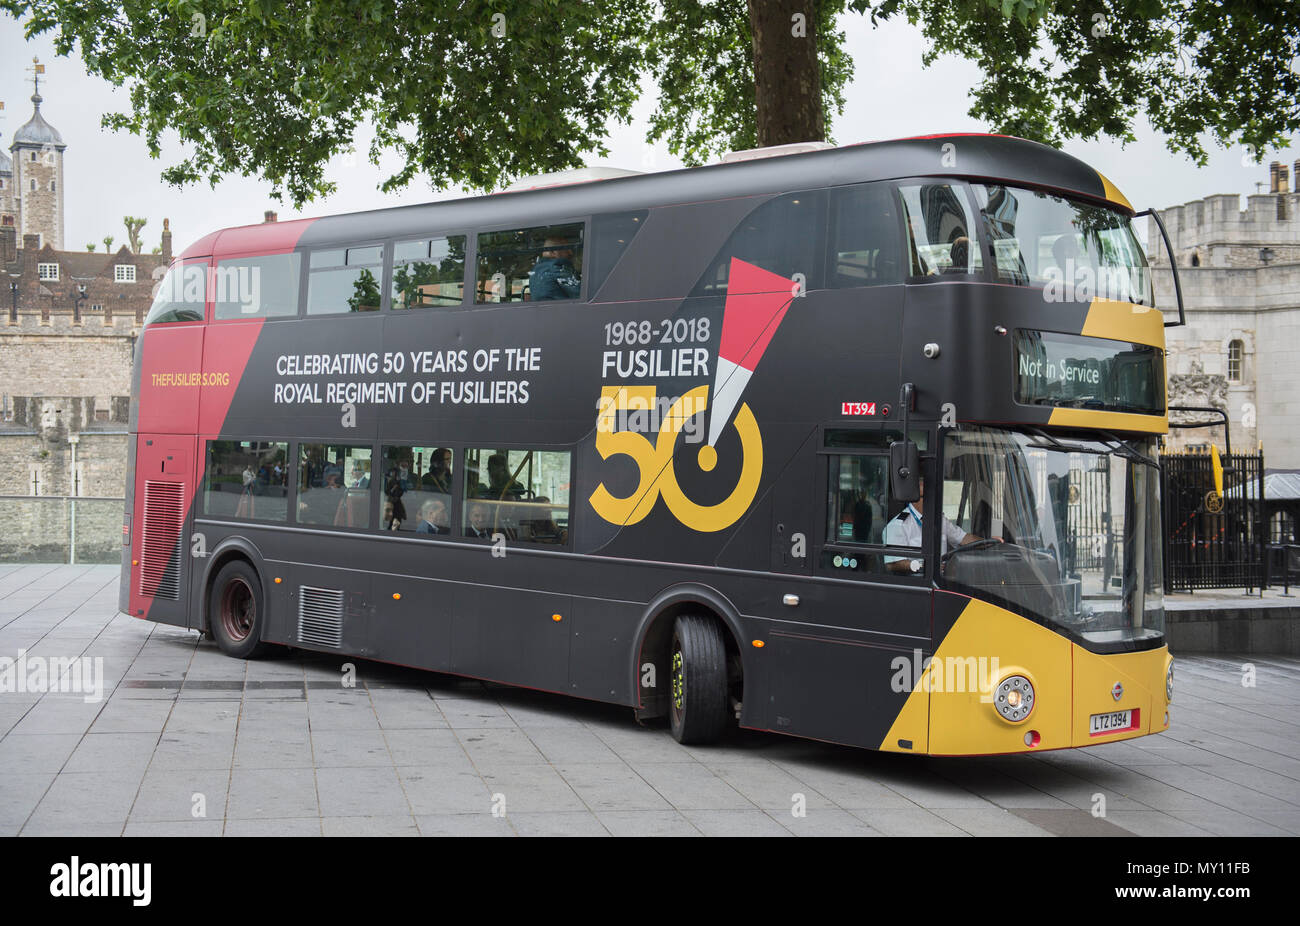 Tower of London, UK. 5 June, 2018. To mark the special occasion of the Royal Regiment of Fusiliers 50th anniversary a new double decker Routemaster bus has been wrapped in the Regimental colours of rose and primrose on a striking black background and features the Fusilier 50 logo. The initiative is a joint partnership between the Royal Regiment of Fusiliers, Go-Ahead London, Exterion Media and Historic Royal Palaces, an independent charity who look after The Tower of London. Credit: Malcolm Park editorial/Alamy Live News Stock Photo